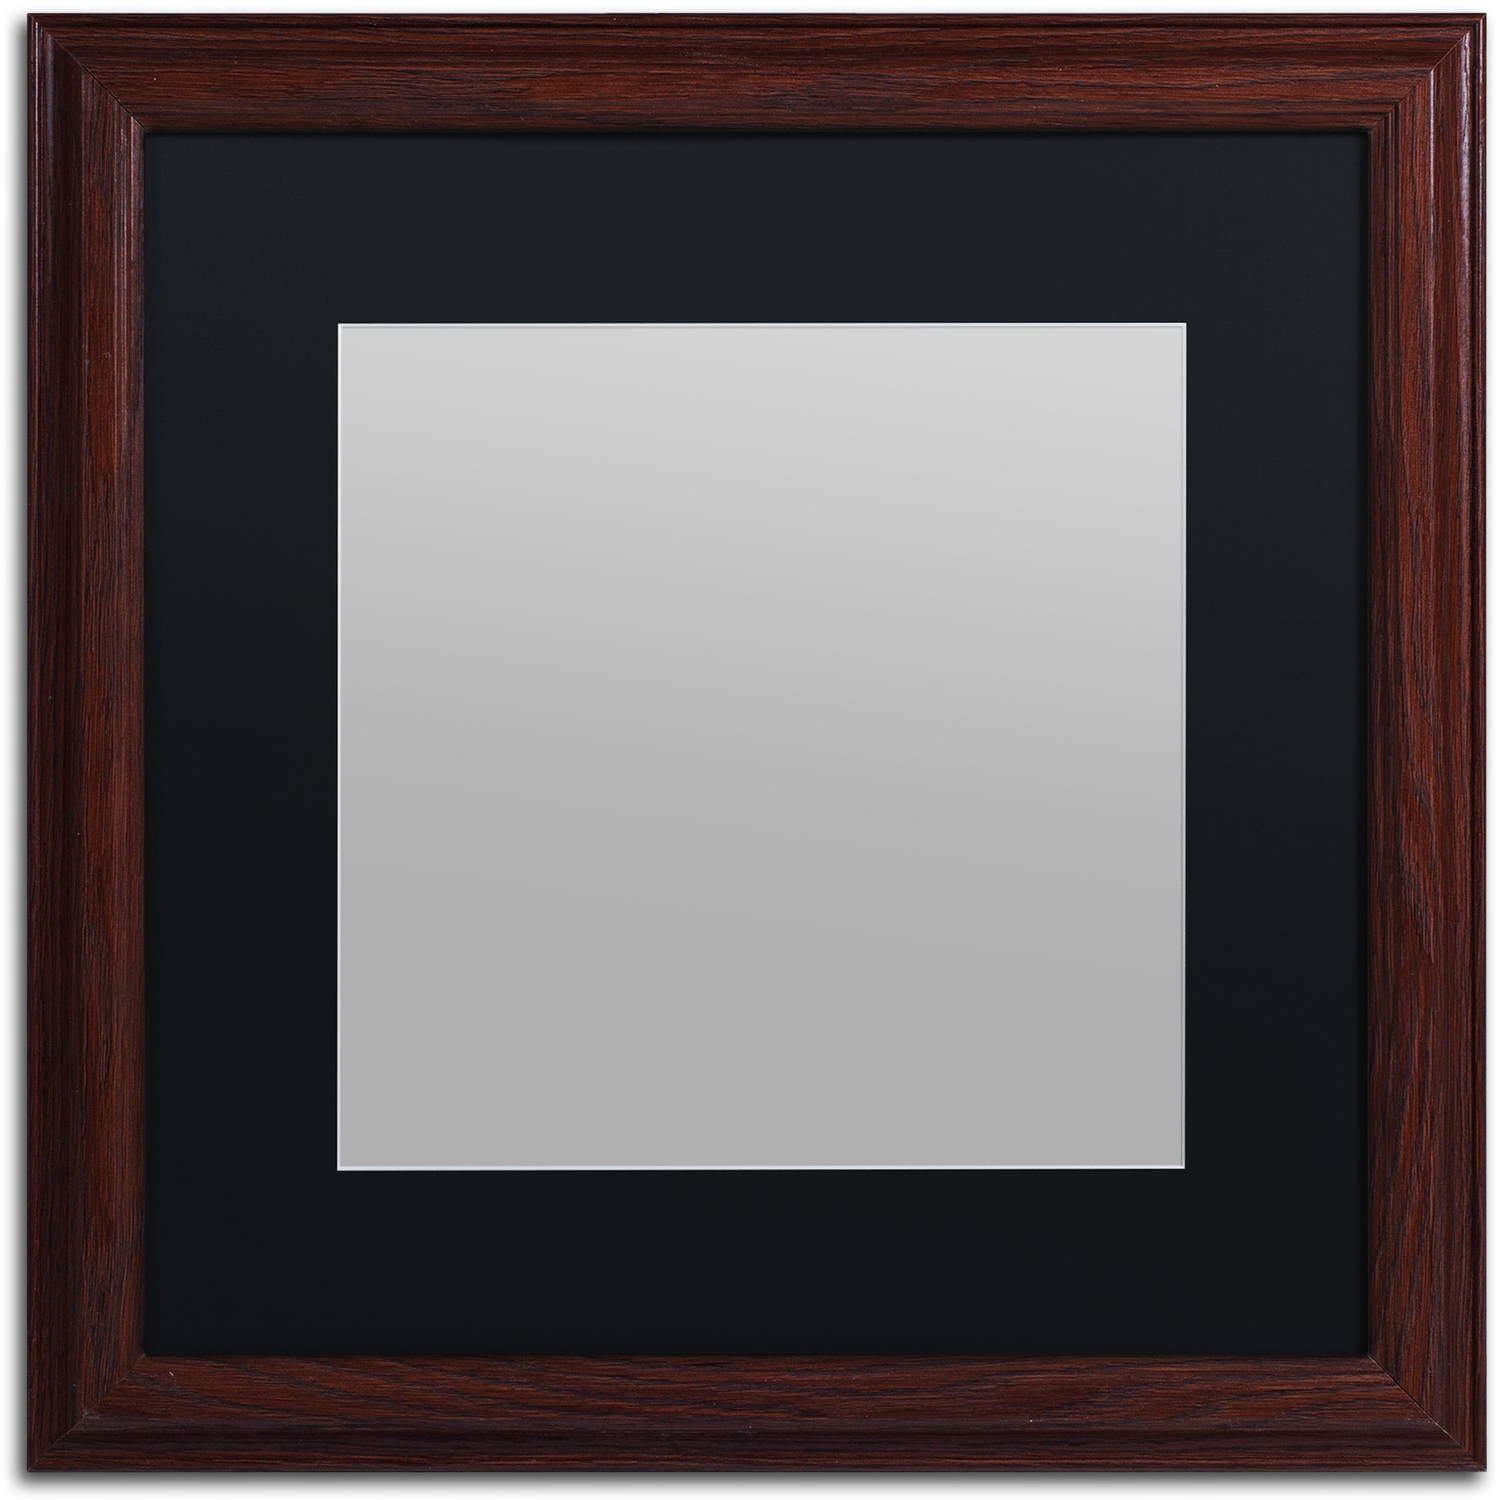 16x16 Picture Frames Black Display Picture Frame 12x12 Solid Wood with Mat Wooden Square Photo Frame for Wall Hanging or Table Top Home Decoration-16x16 Black 